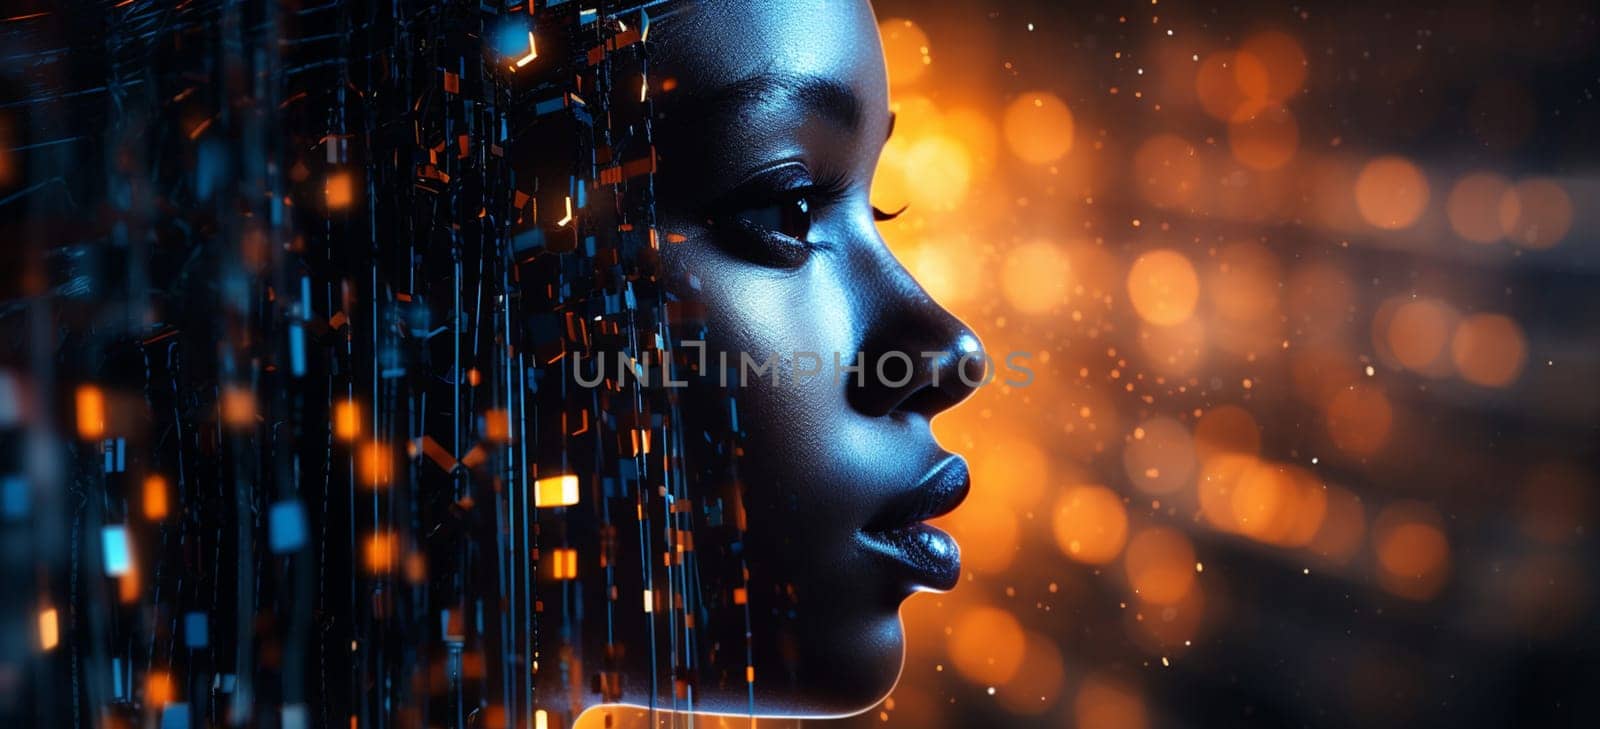 Futuristic robotic woman side view, Beauty portrait of African American cyborg girl. by Andelov13